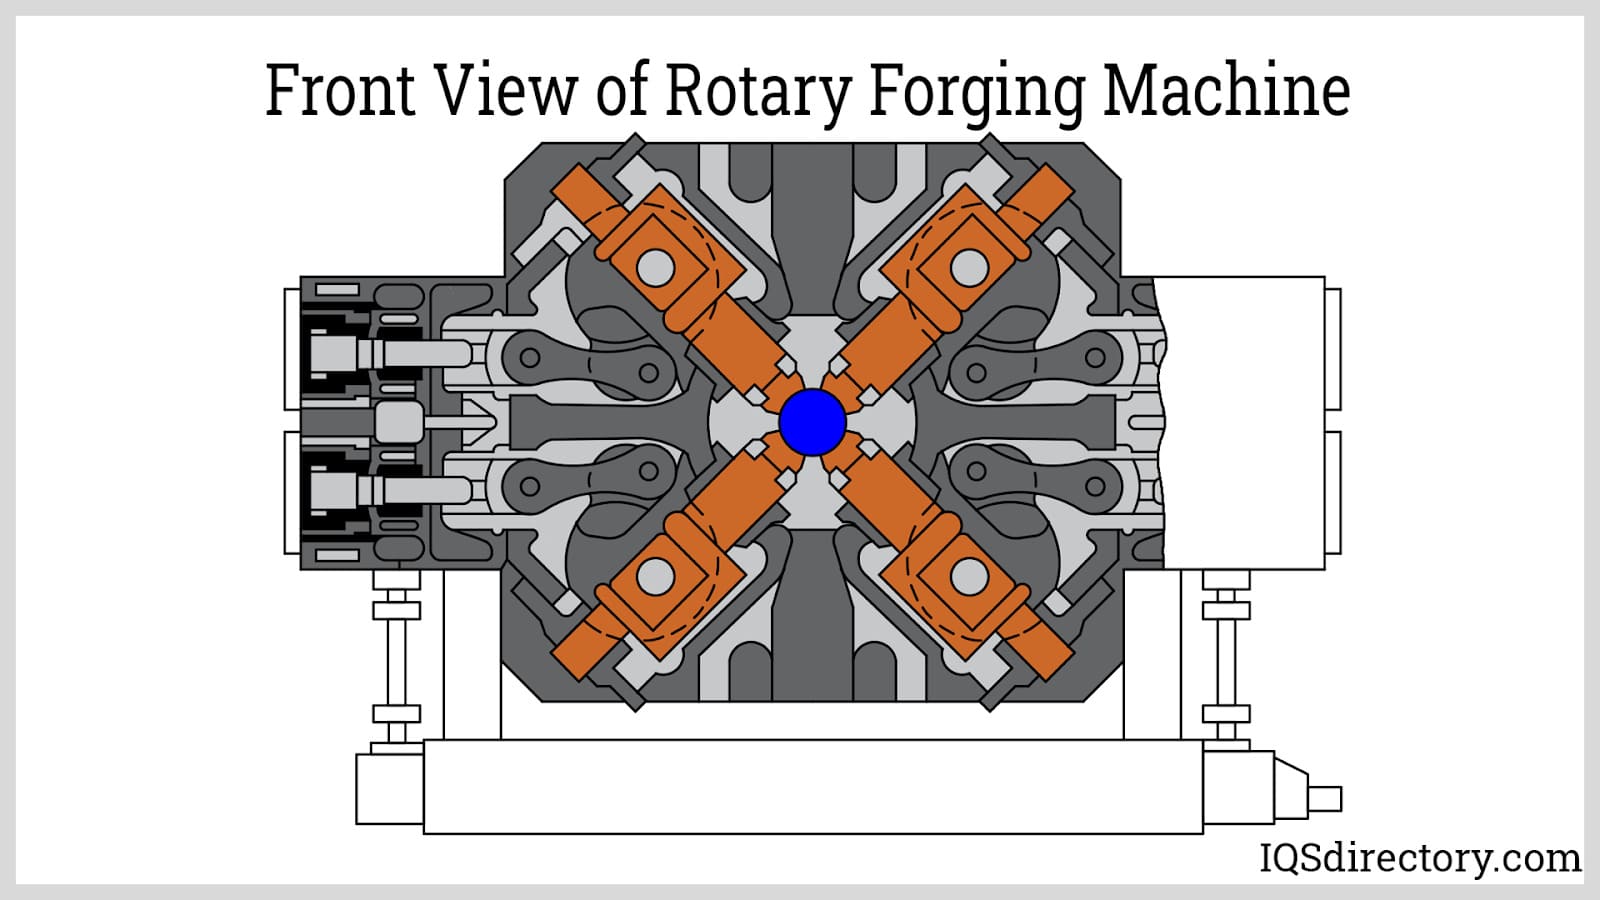 Front View of Rotary Forging Machine